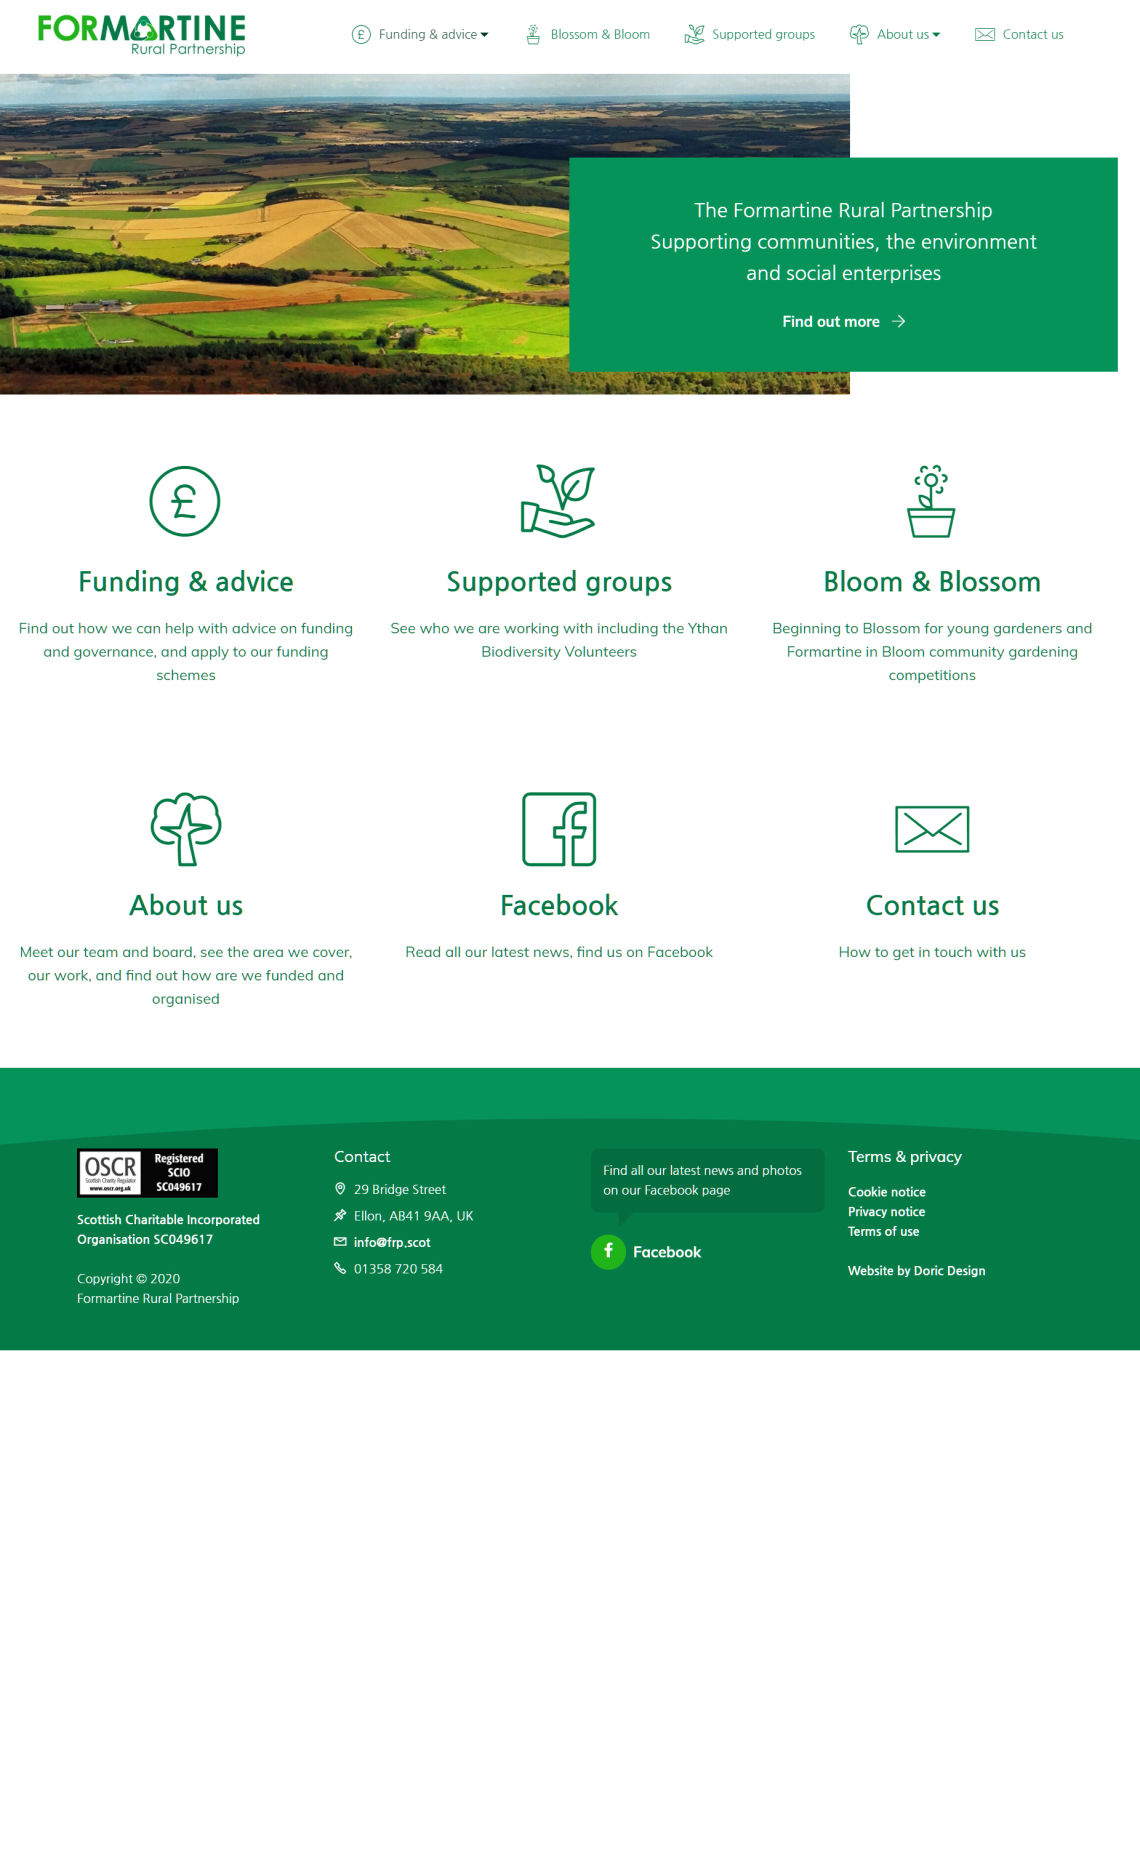 Homepage of the Formartine Rural Partnership